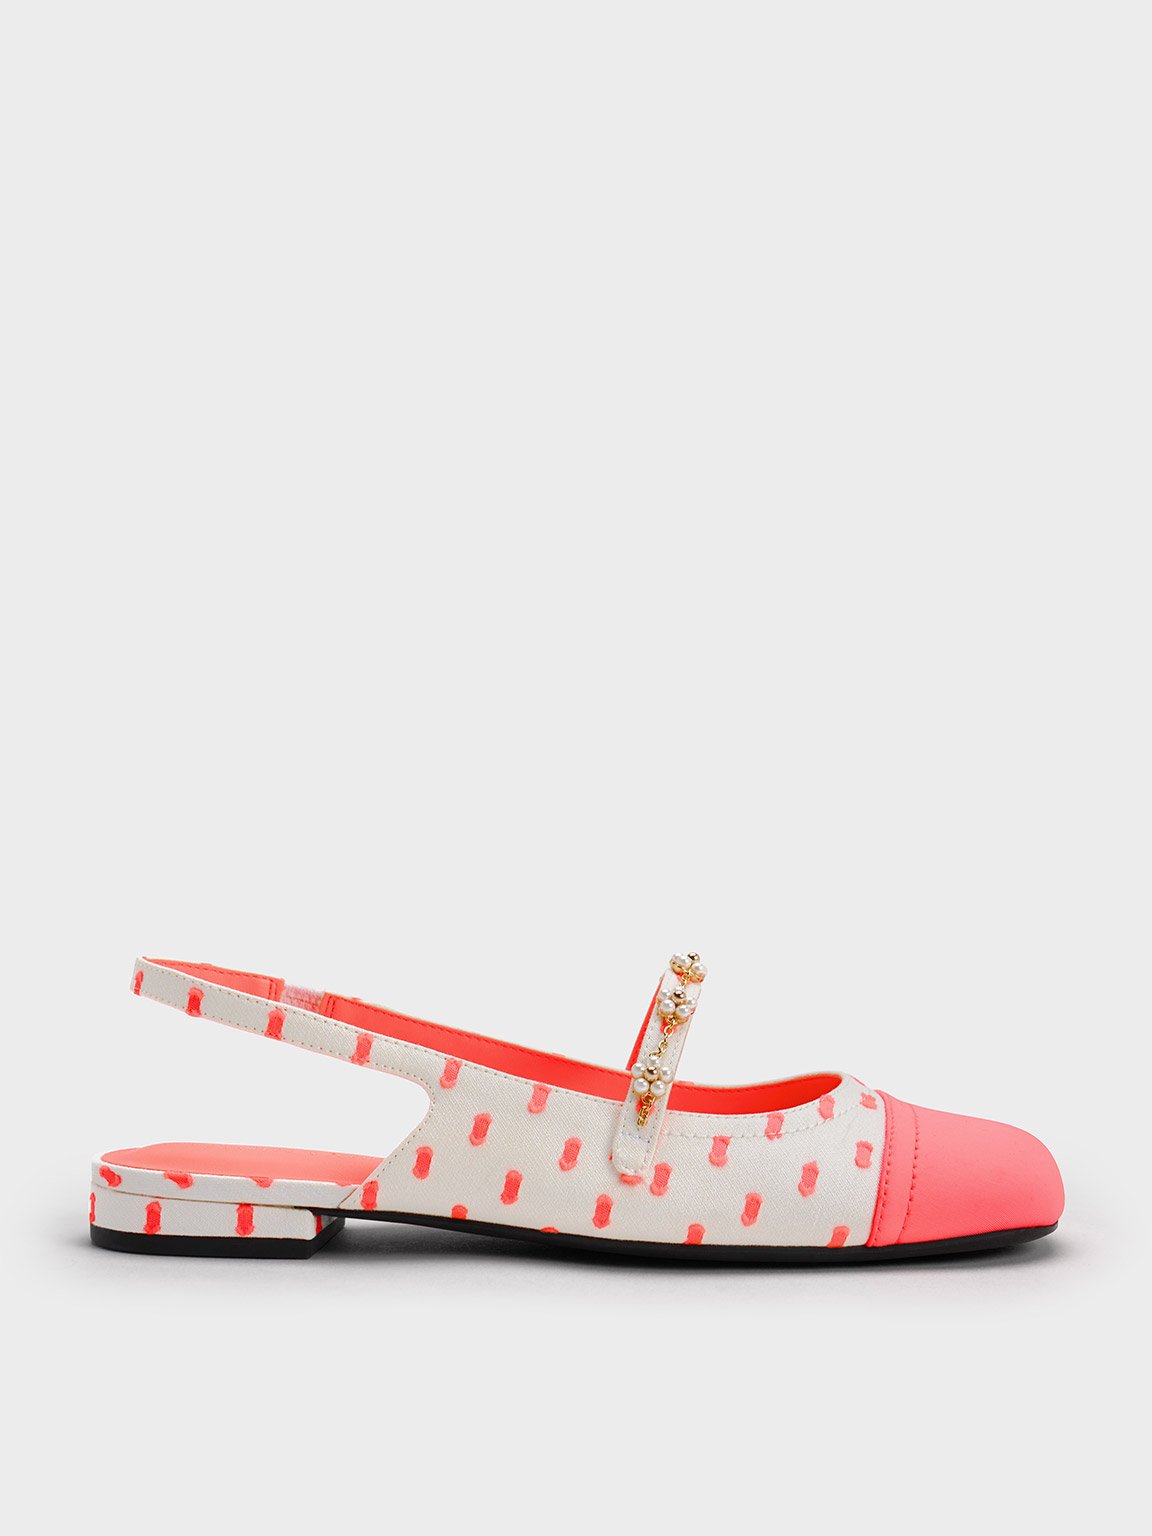 Charles & Keith Beaded Flower Printed Slingback Flats In Coral Pink